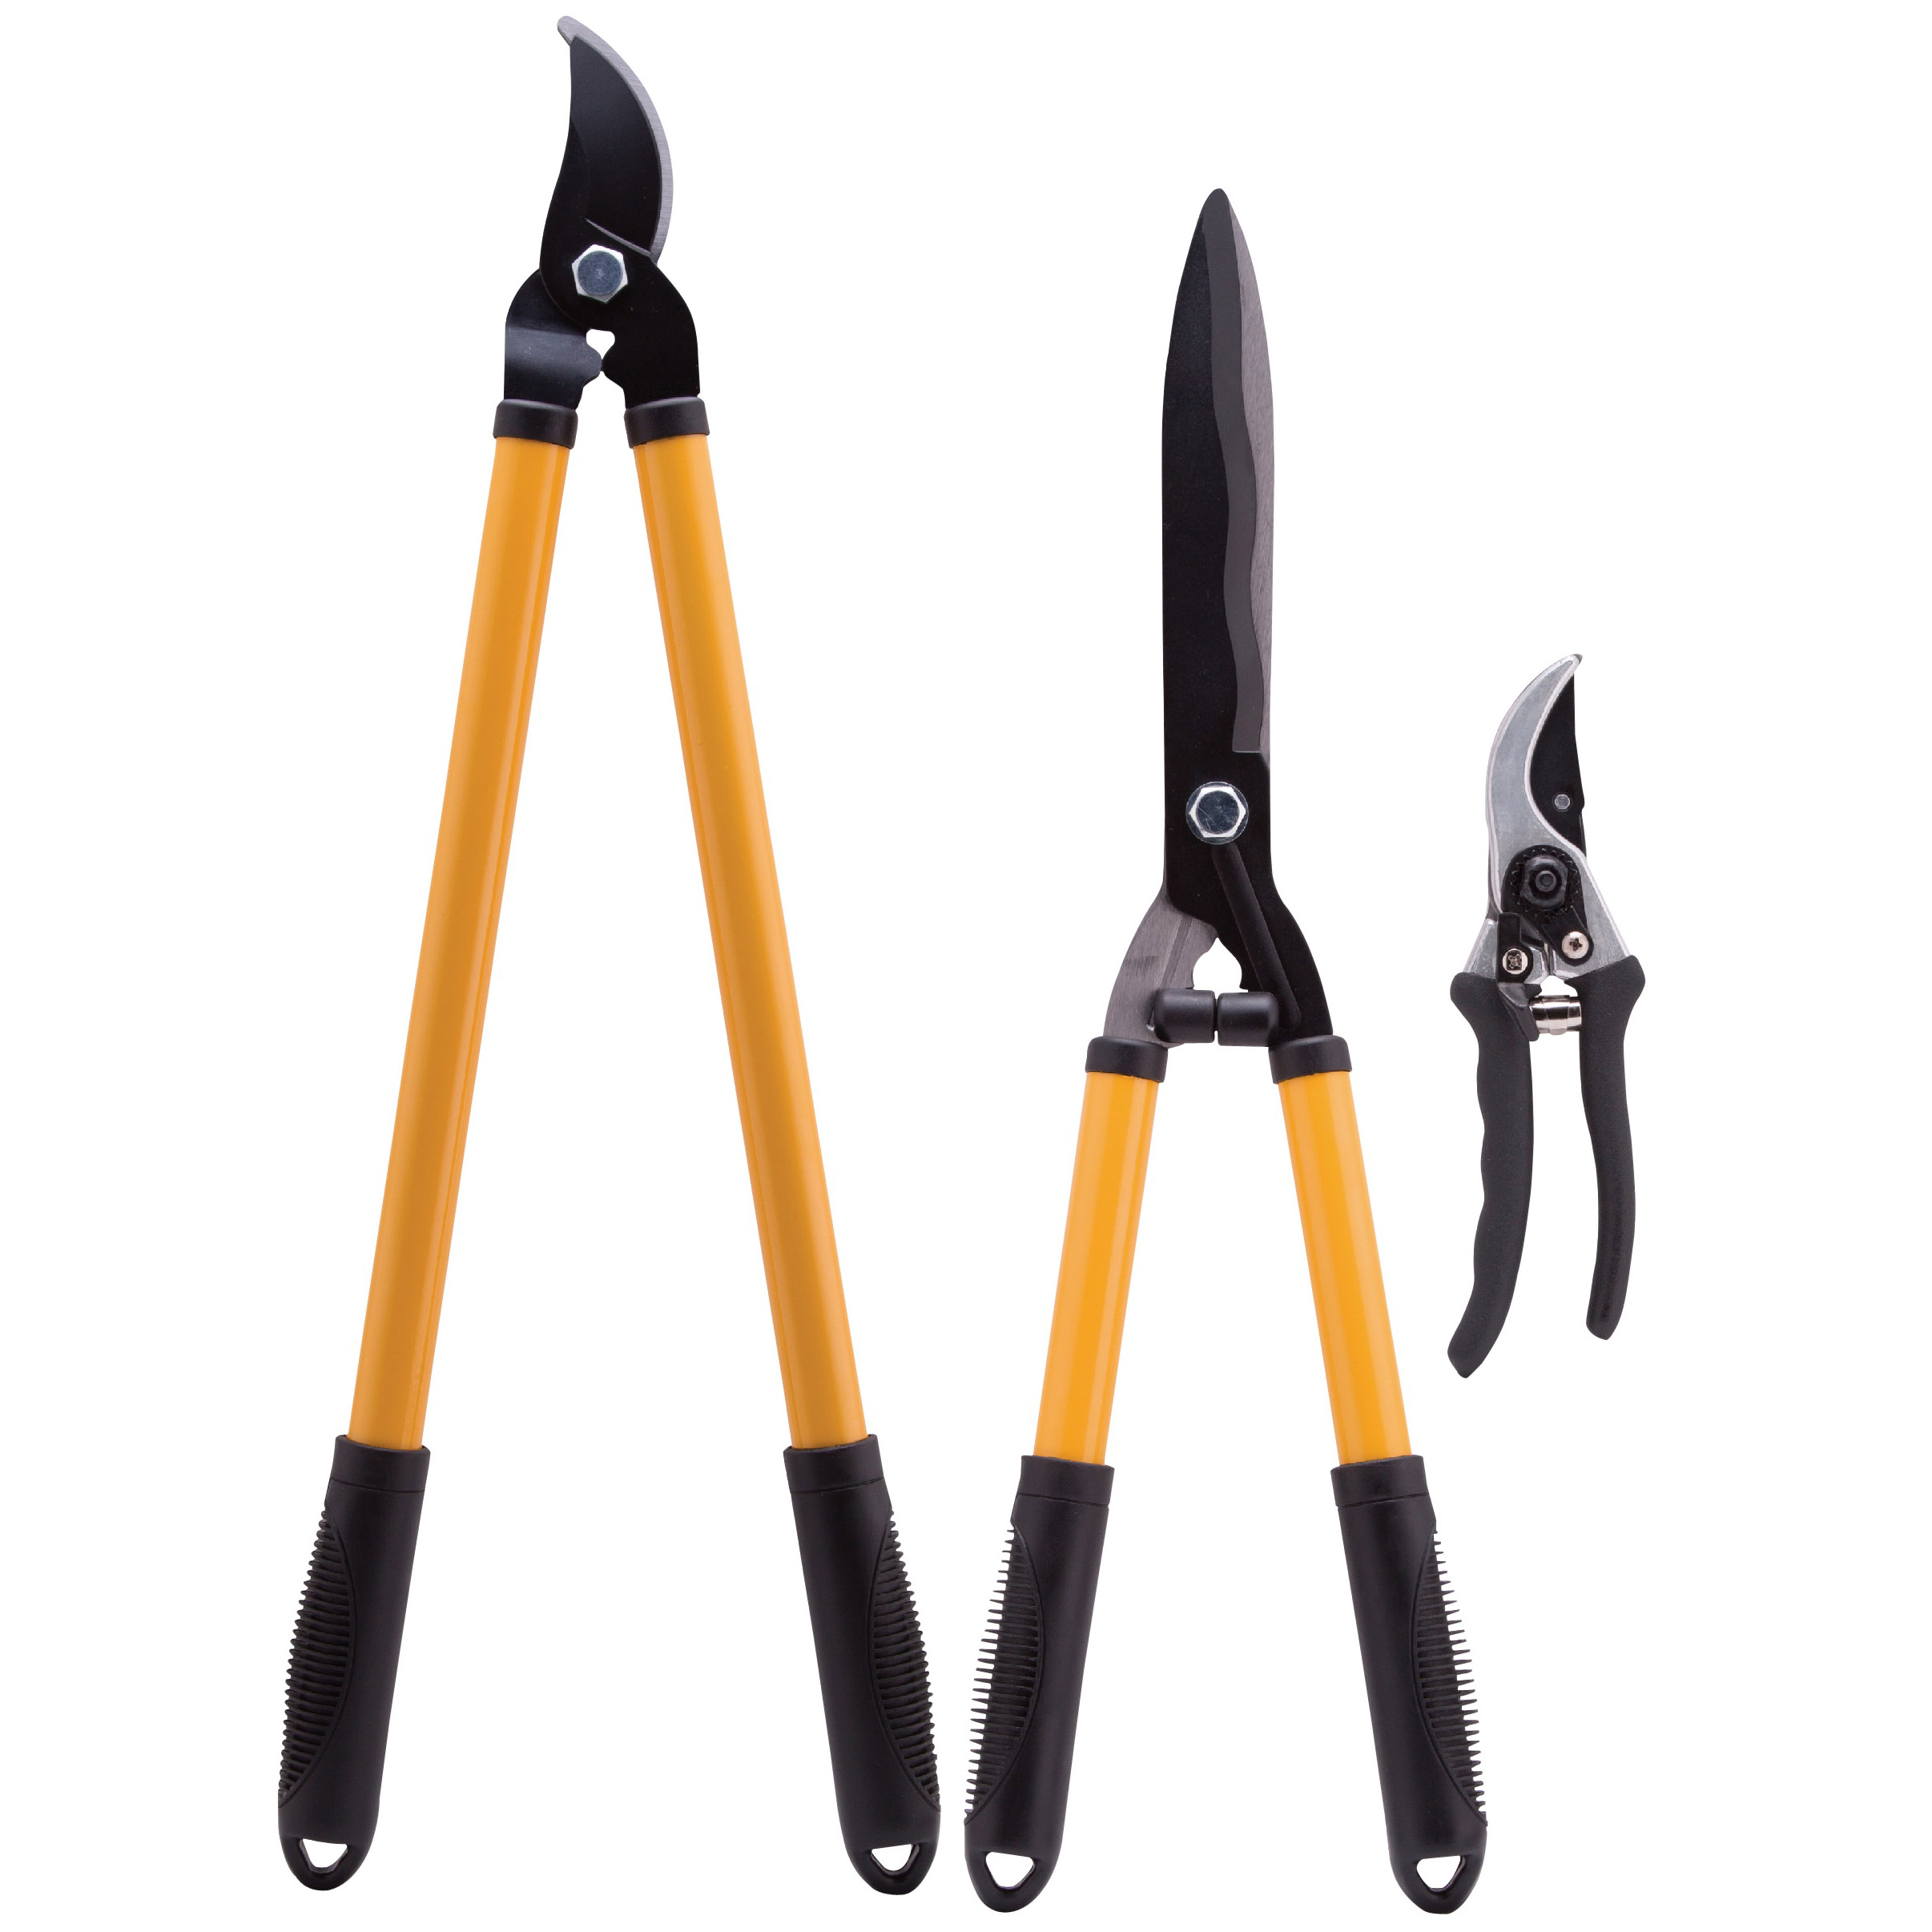 Landscapers Select GG-SET2 Pruner/Lopping Shear Set, 23 By-Pass Lopper: 1-1/4 8 By-Pass Pruner: 1/2 in Cutting Capacity - 1